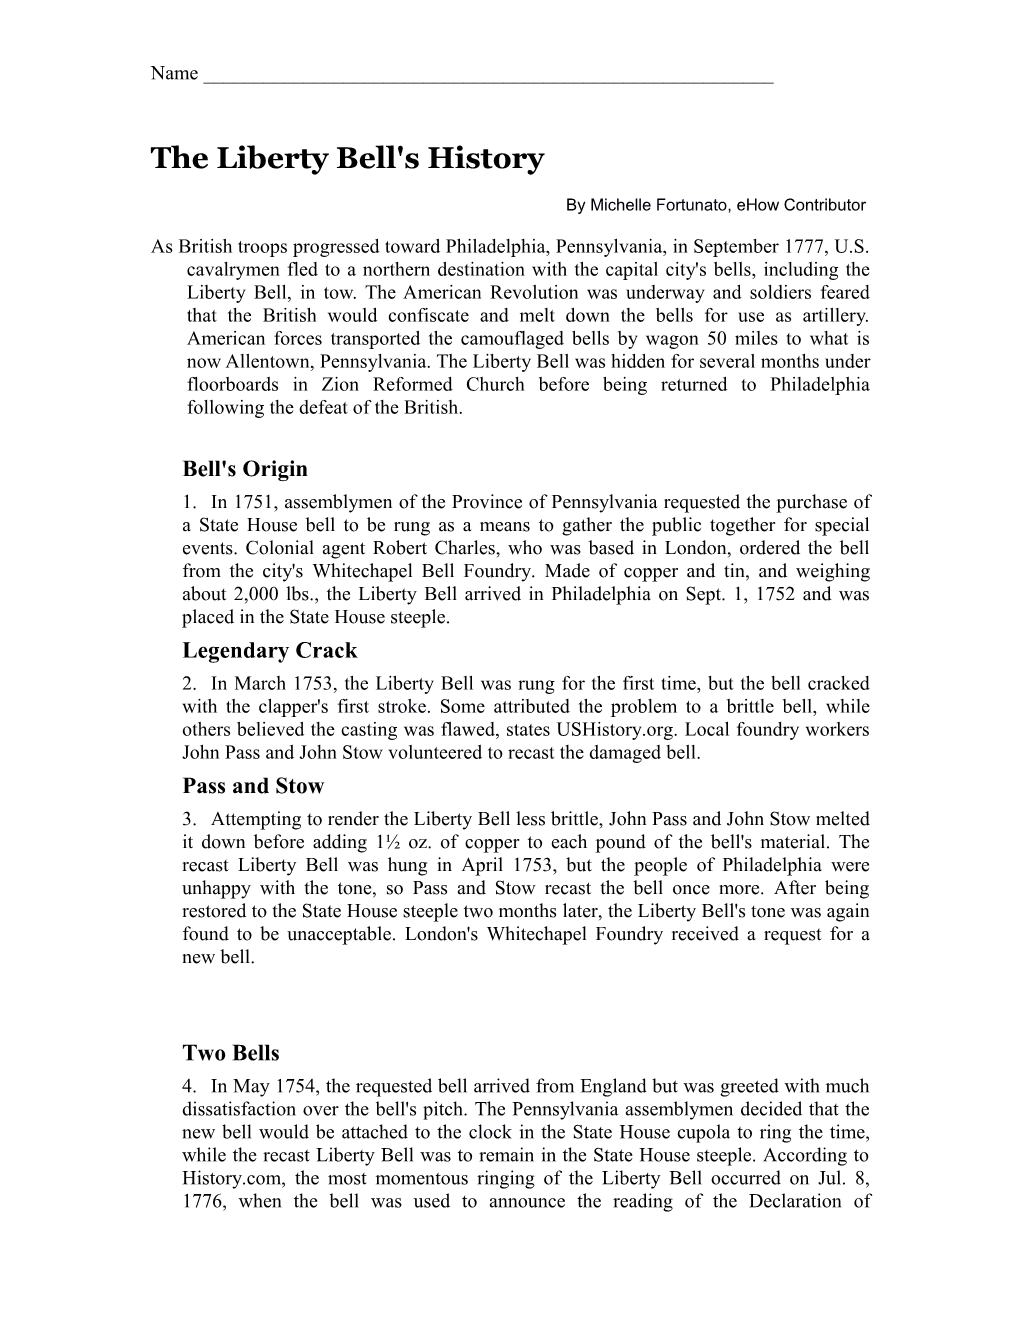 The Liberty Bell's History